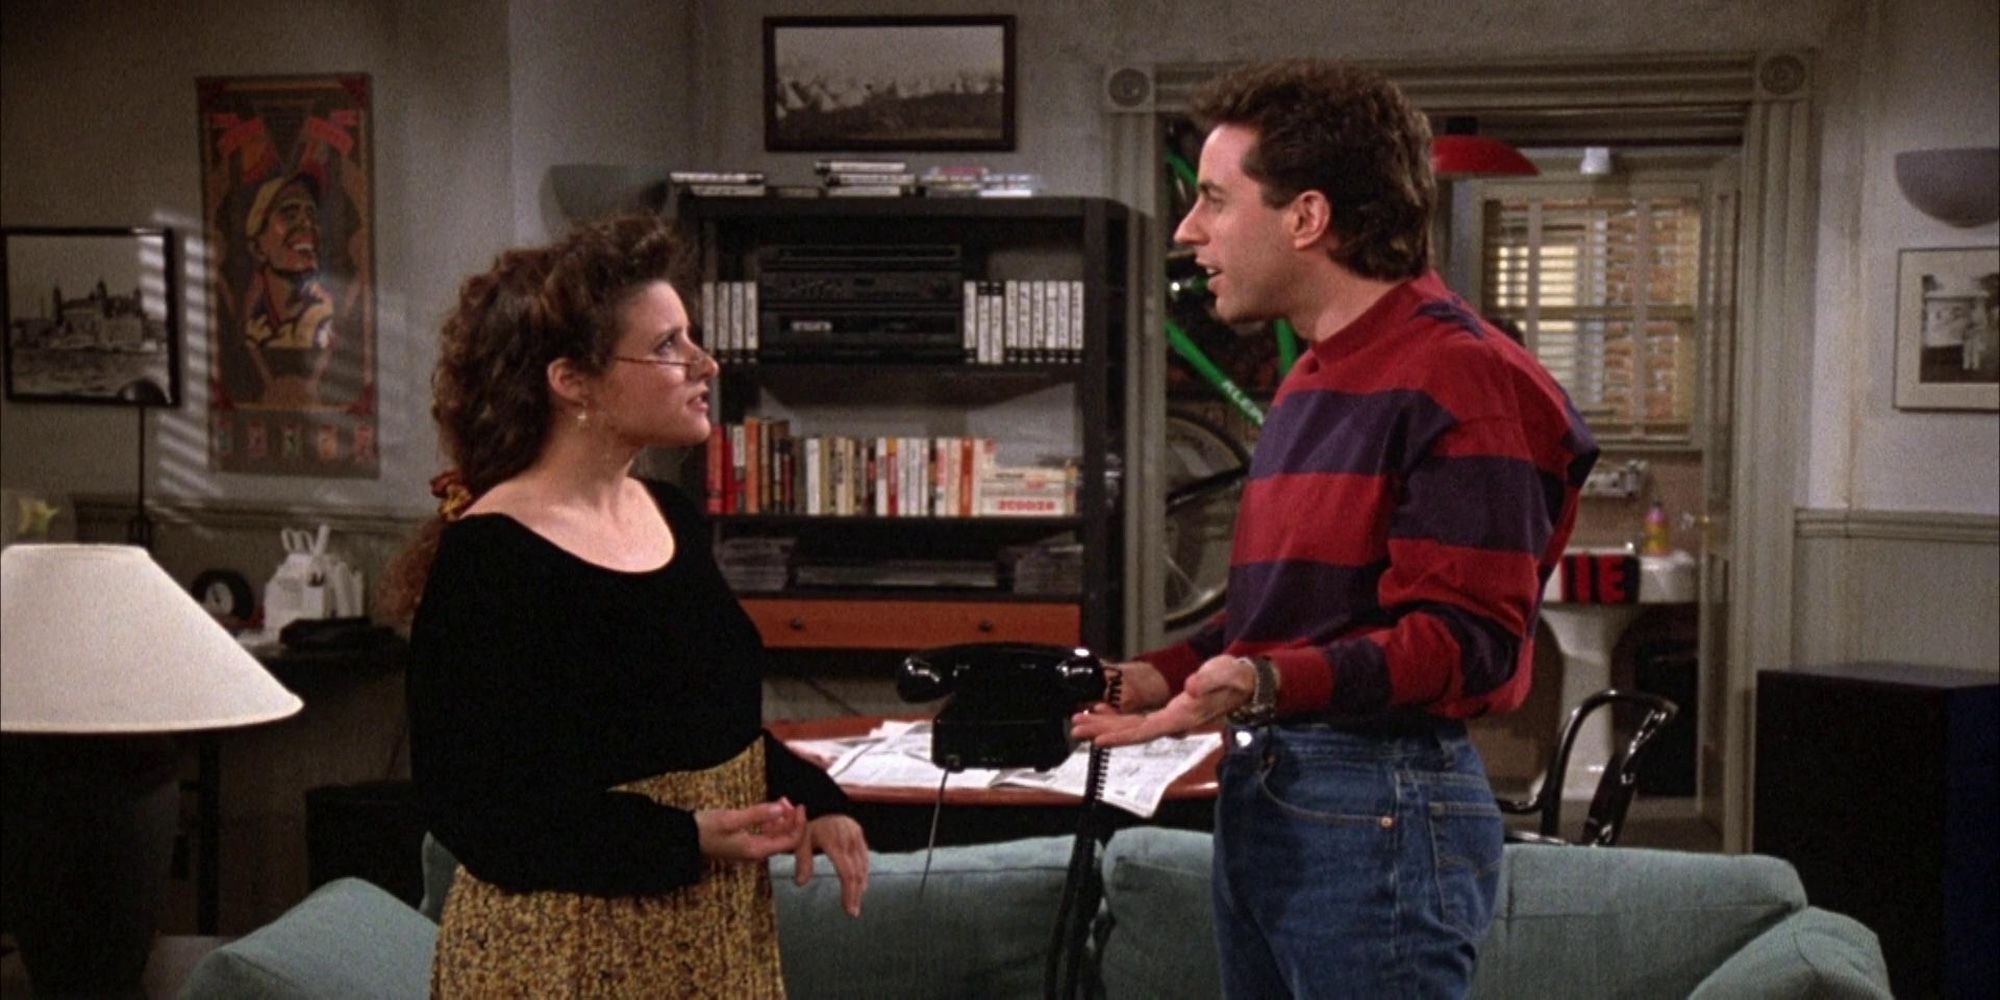 Elaine, played by Julia Louis-Dreyfus, and Jerry, played by Jerry Seinfeld, have a conversation